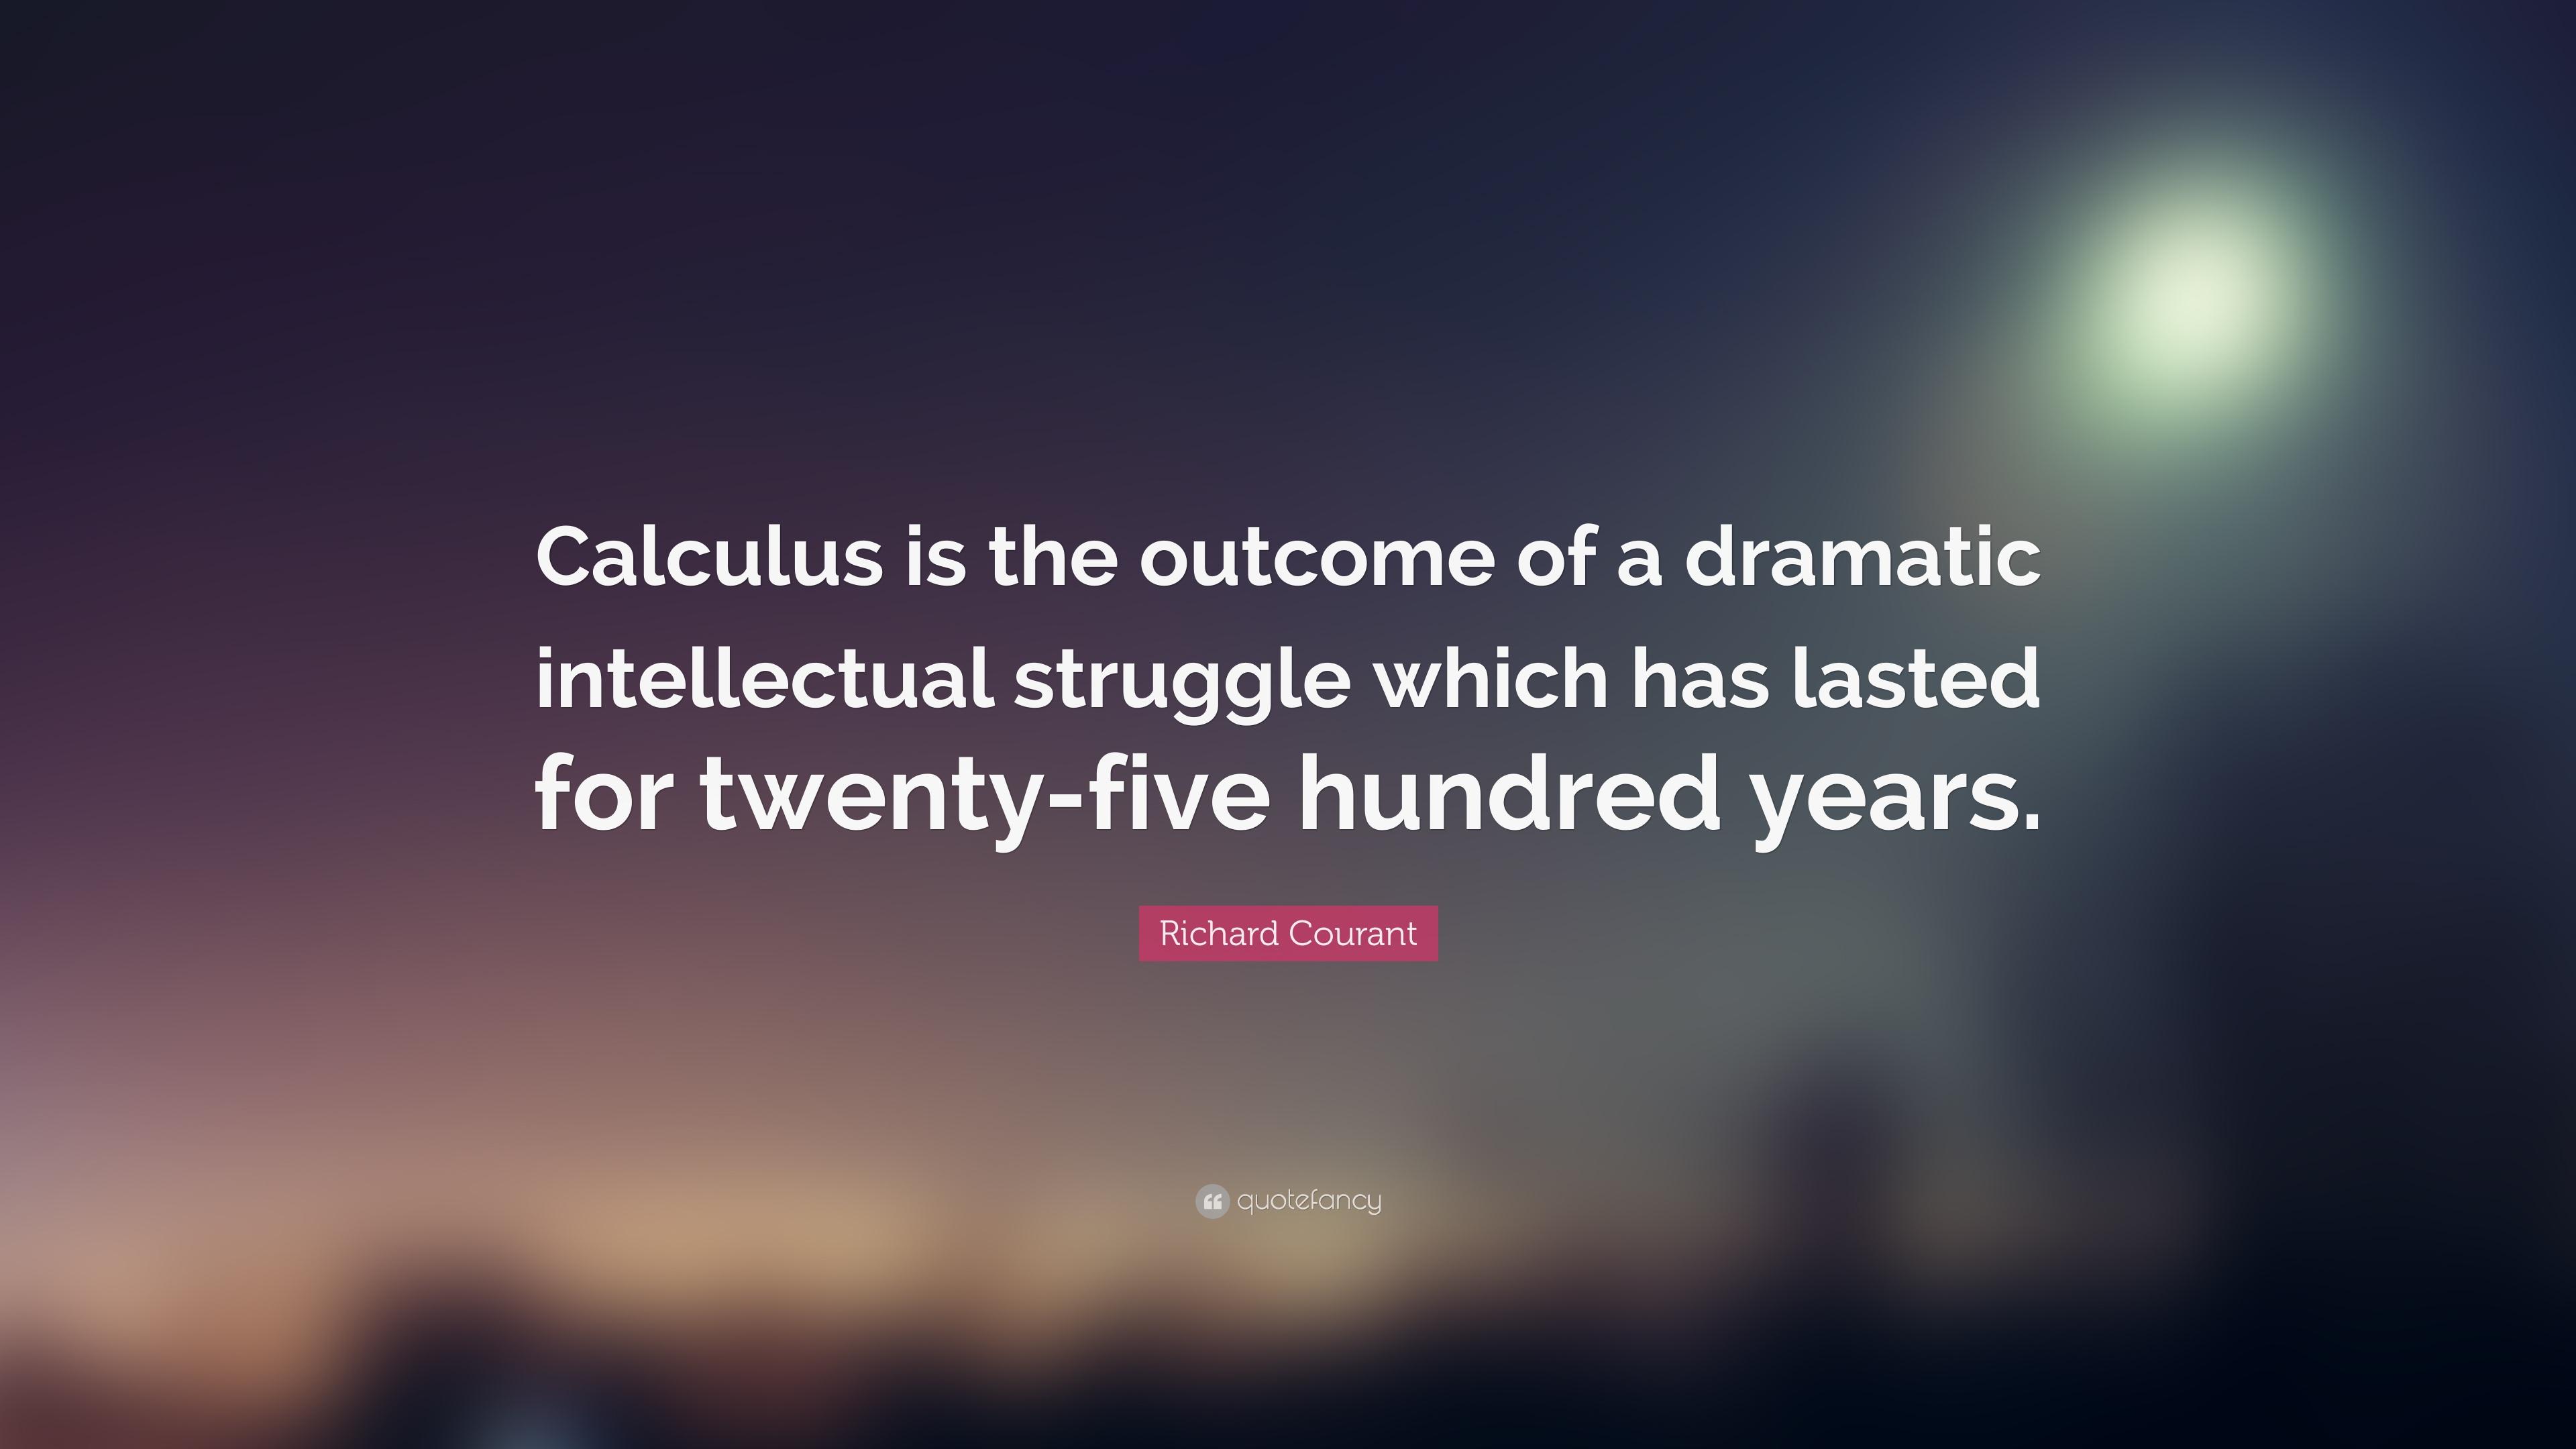 Richard Courant Quote: “Calculus is the outcome of a